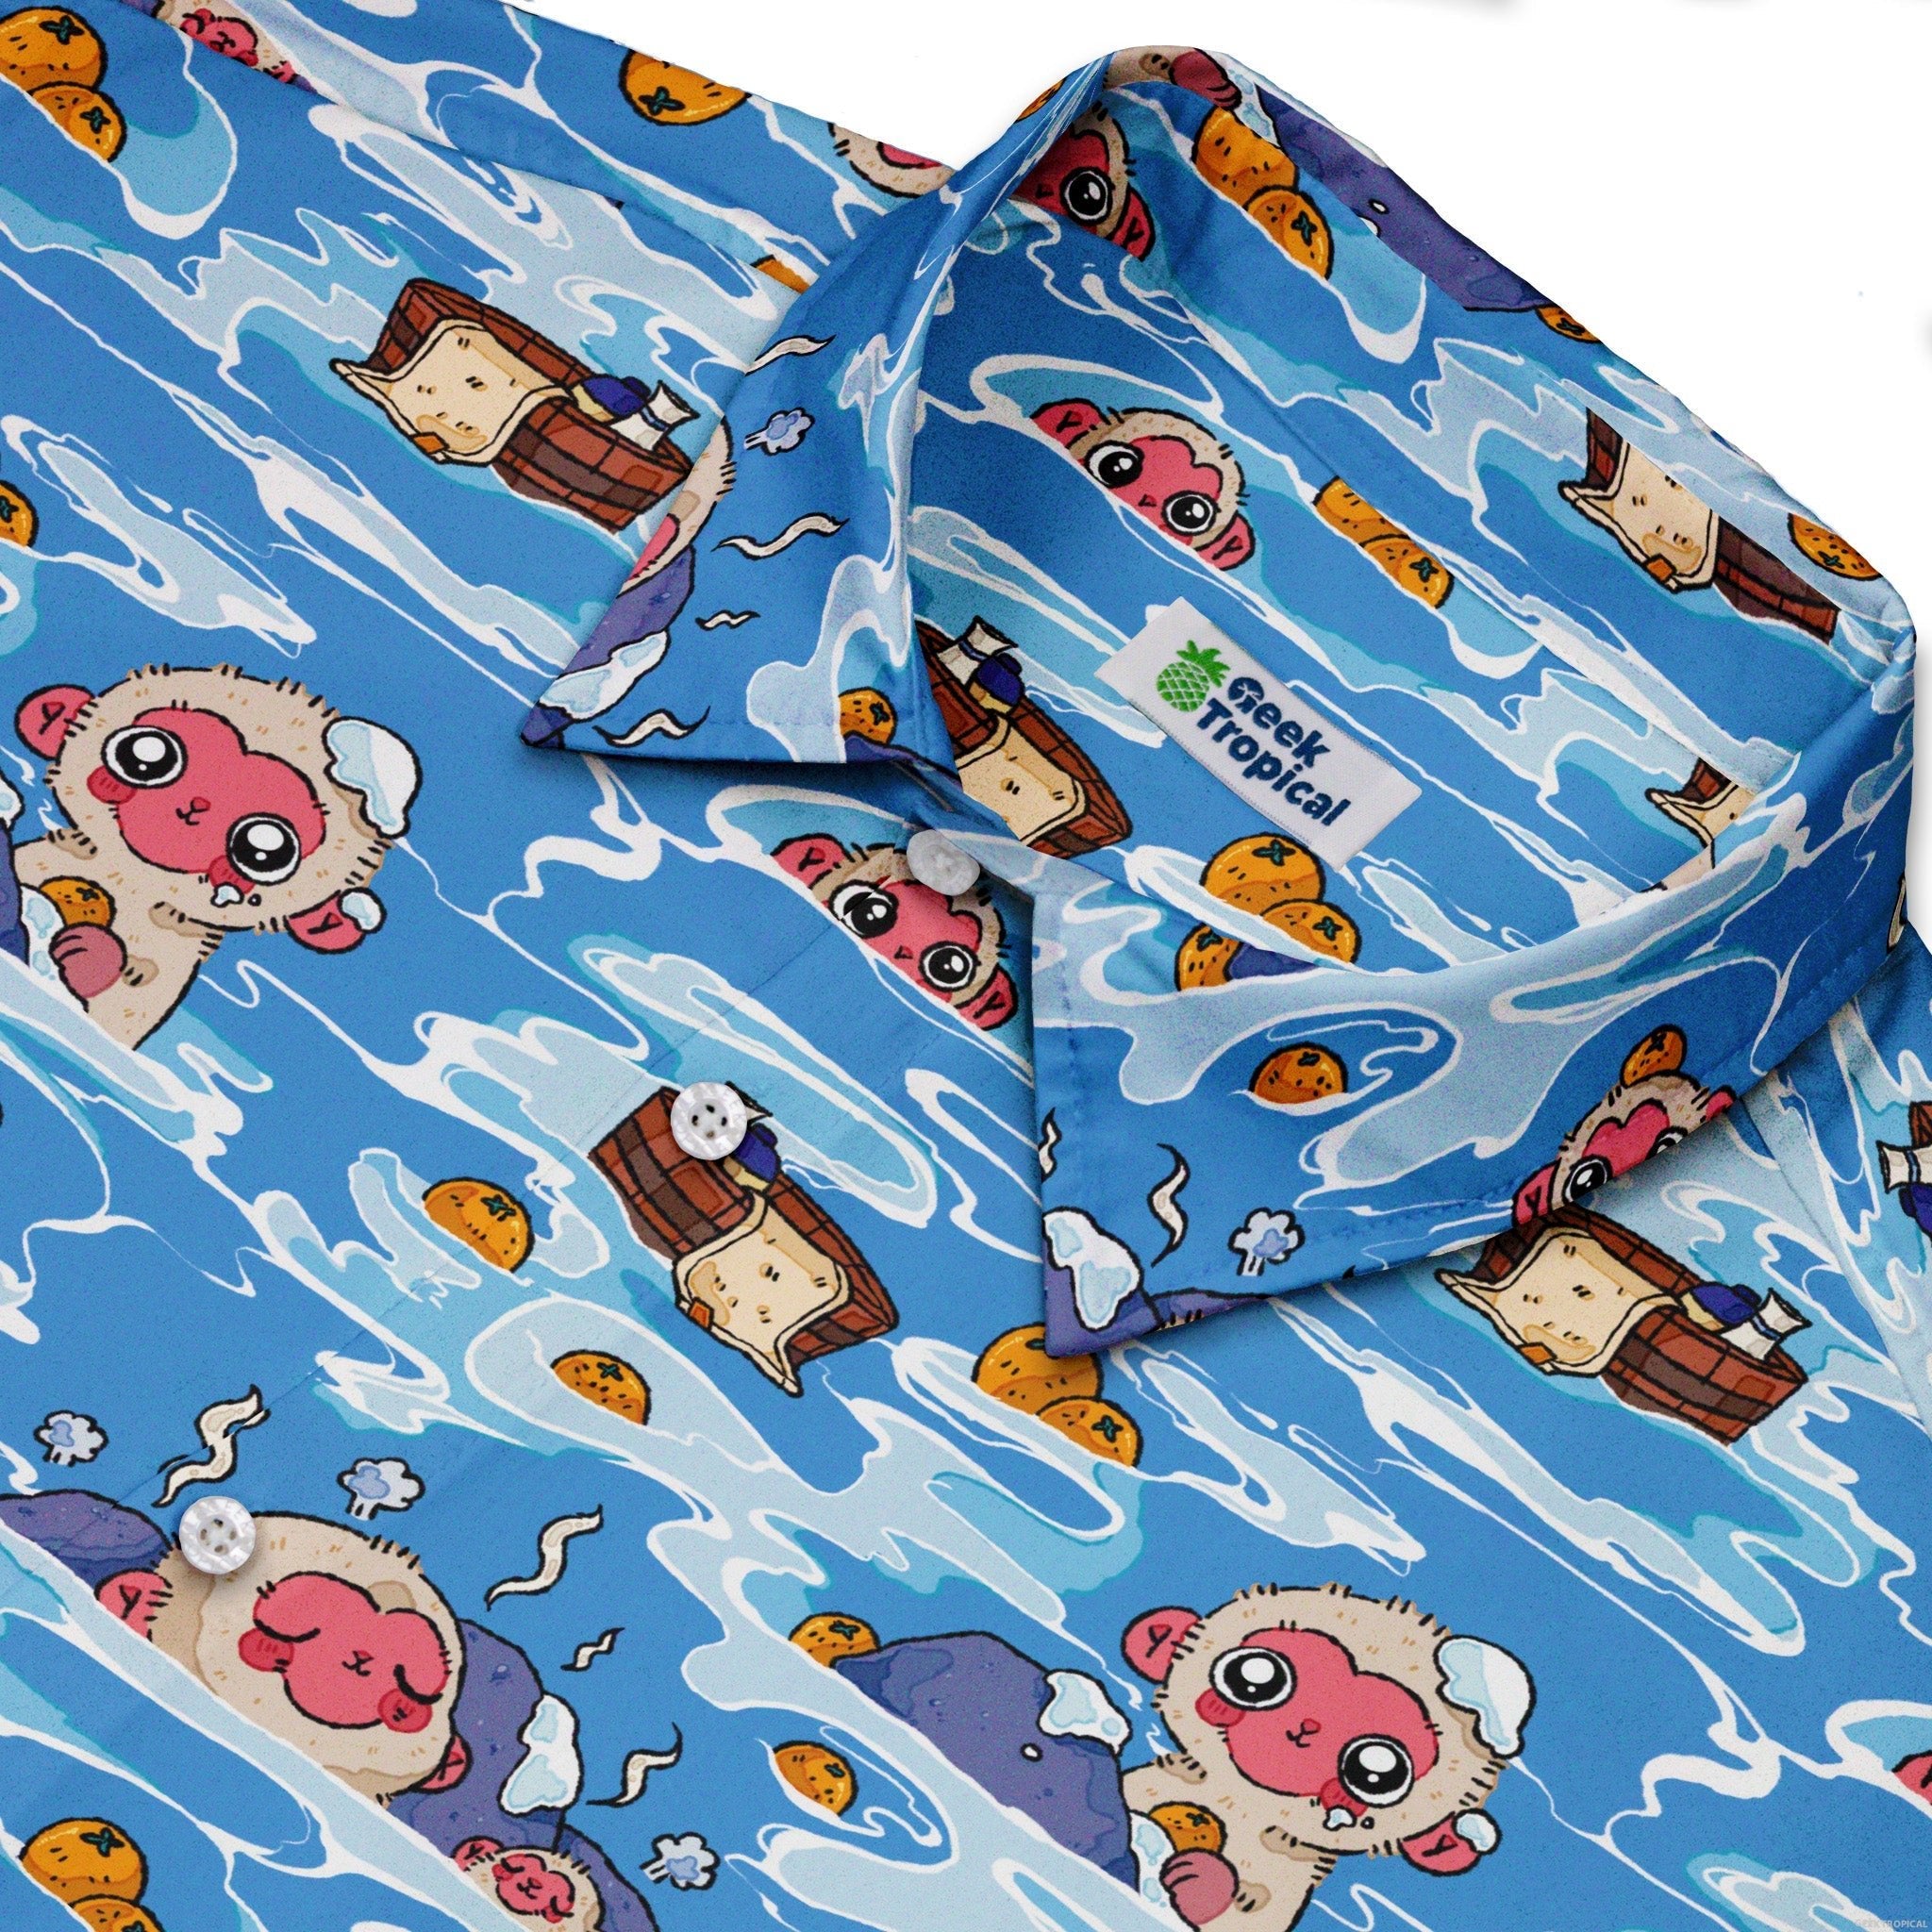 Onsen Snow Monkeys Button Up Shirt - adult sizing - Christmas Print - Design by Ardi Tong